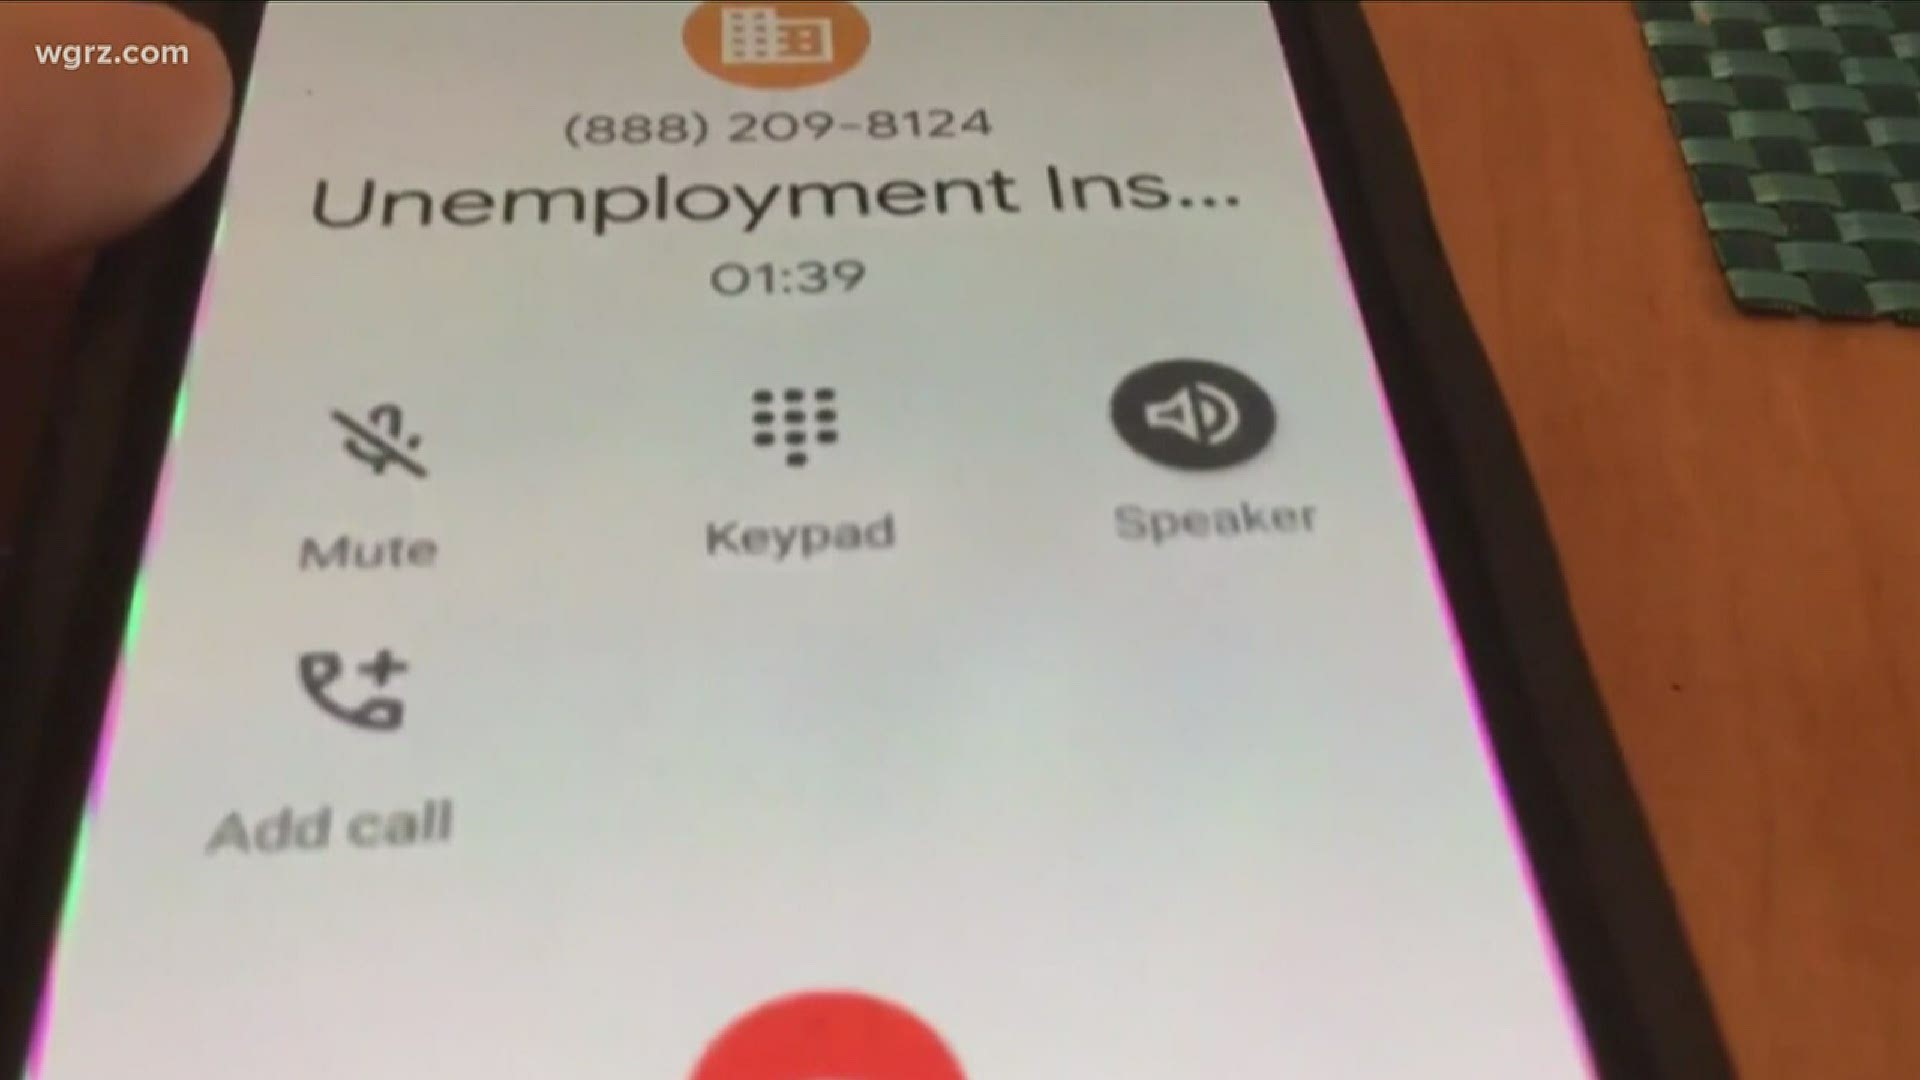 Western New Yorkers have been facing problems with collecting unemployment money for weeks.